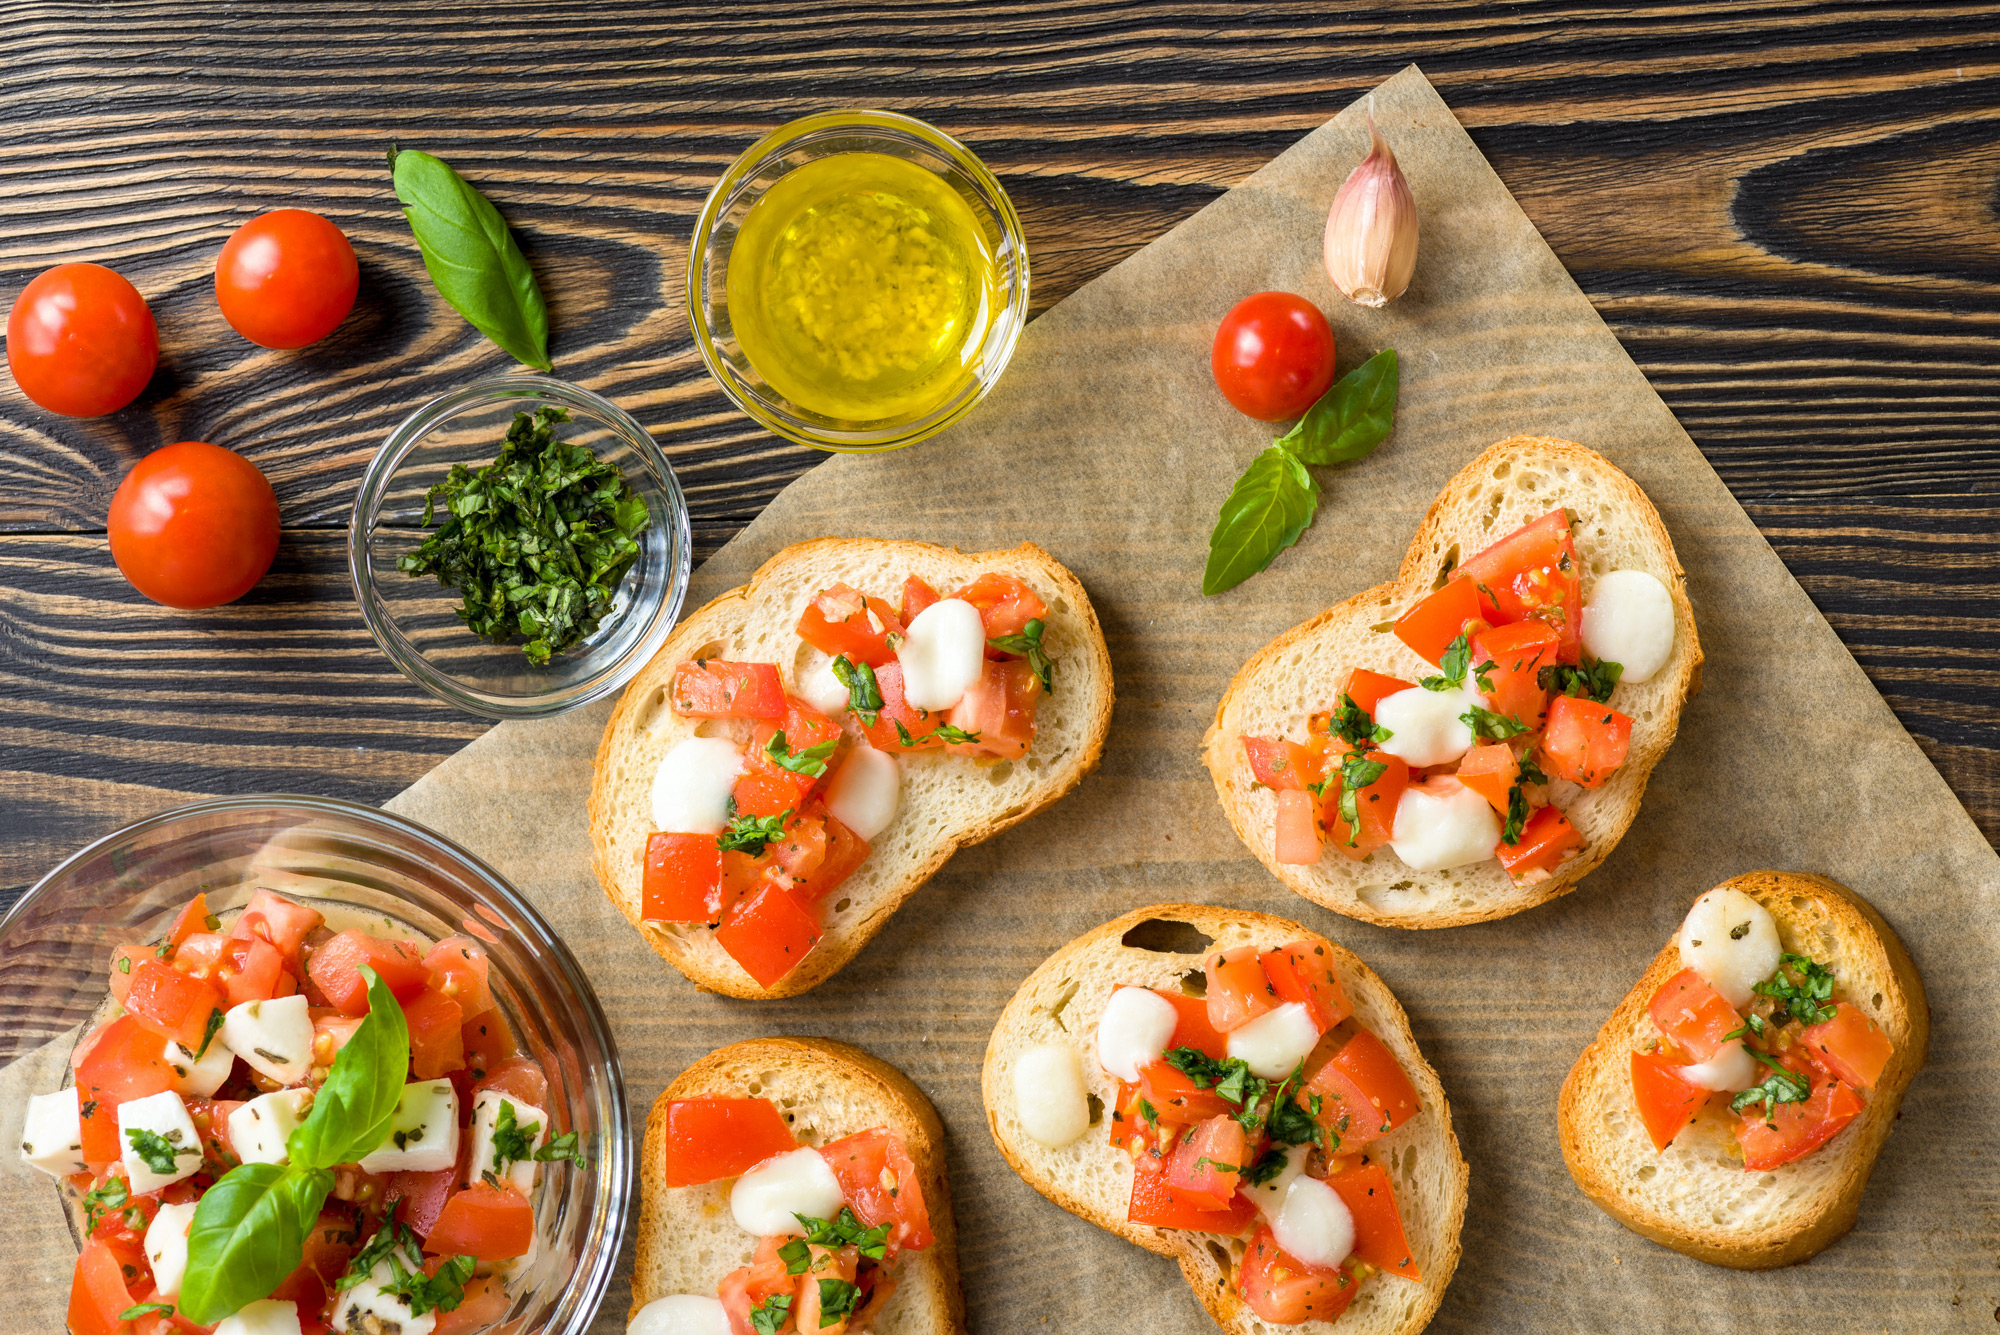 Featured image for “Bruschetta with Basil Antipasto”